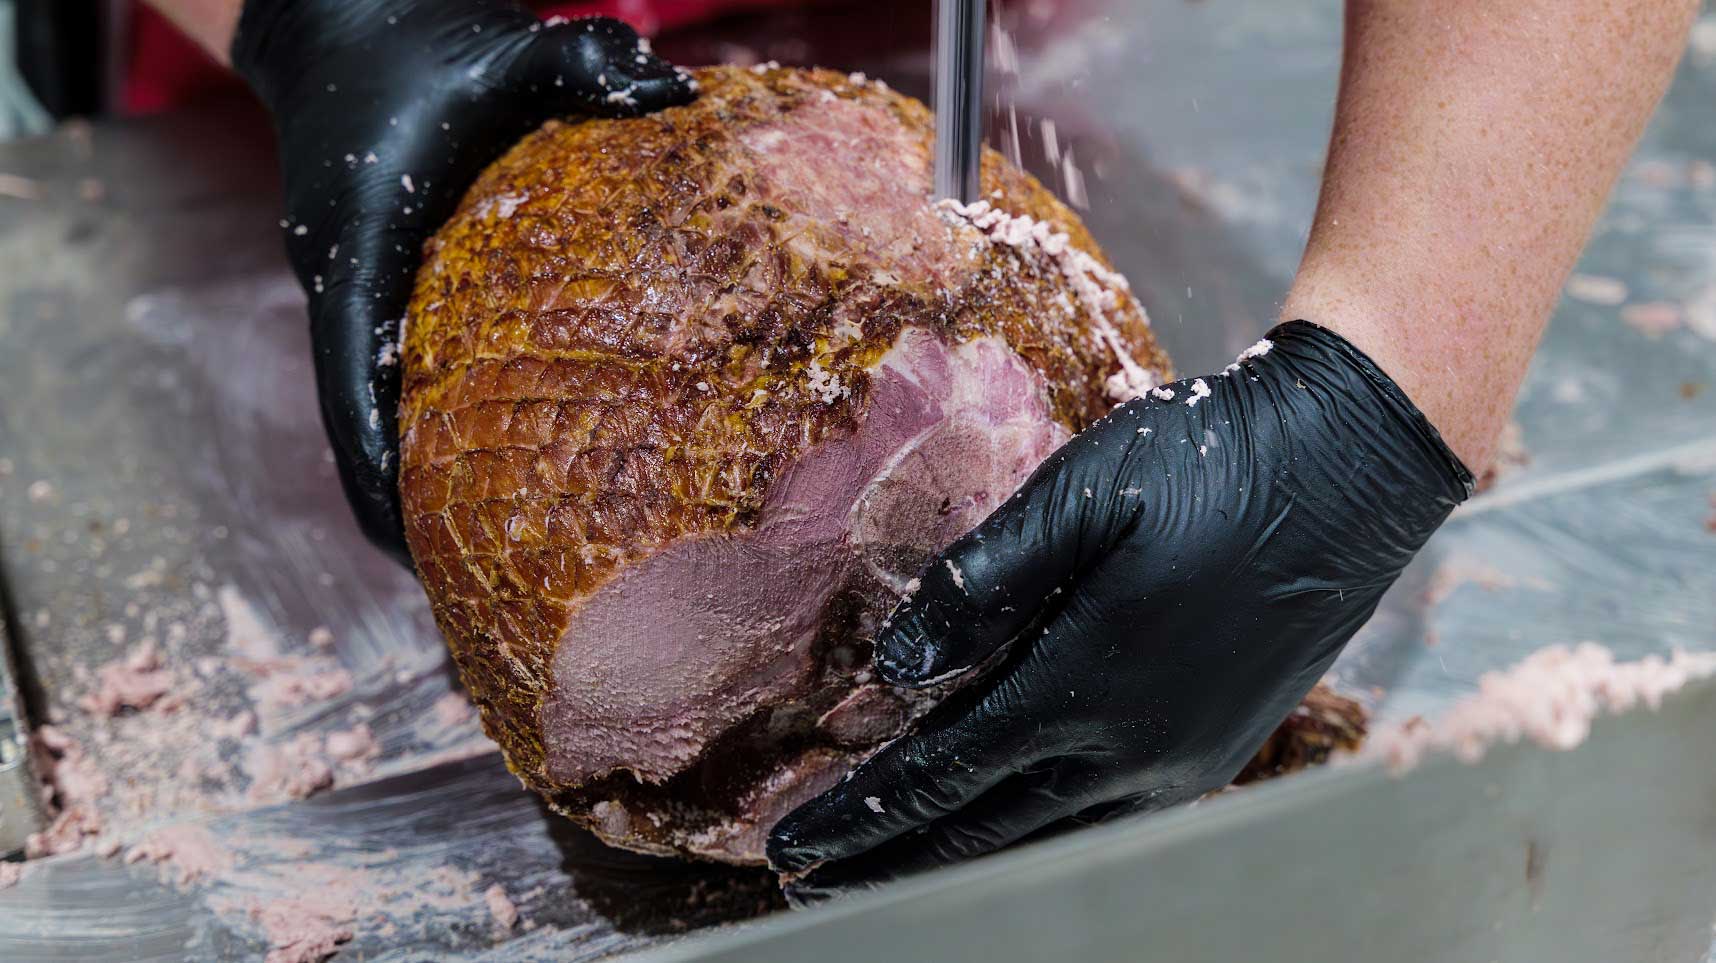 Person in black gloves slicing meat